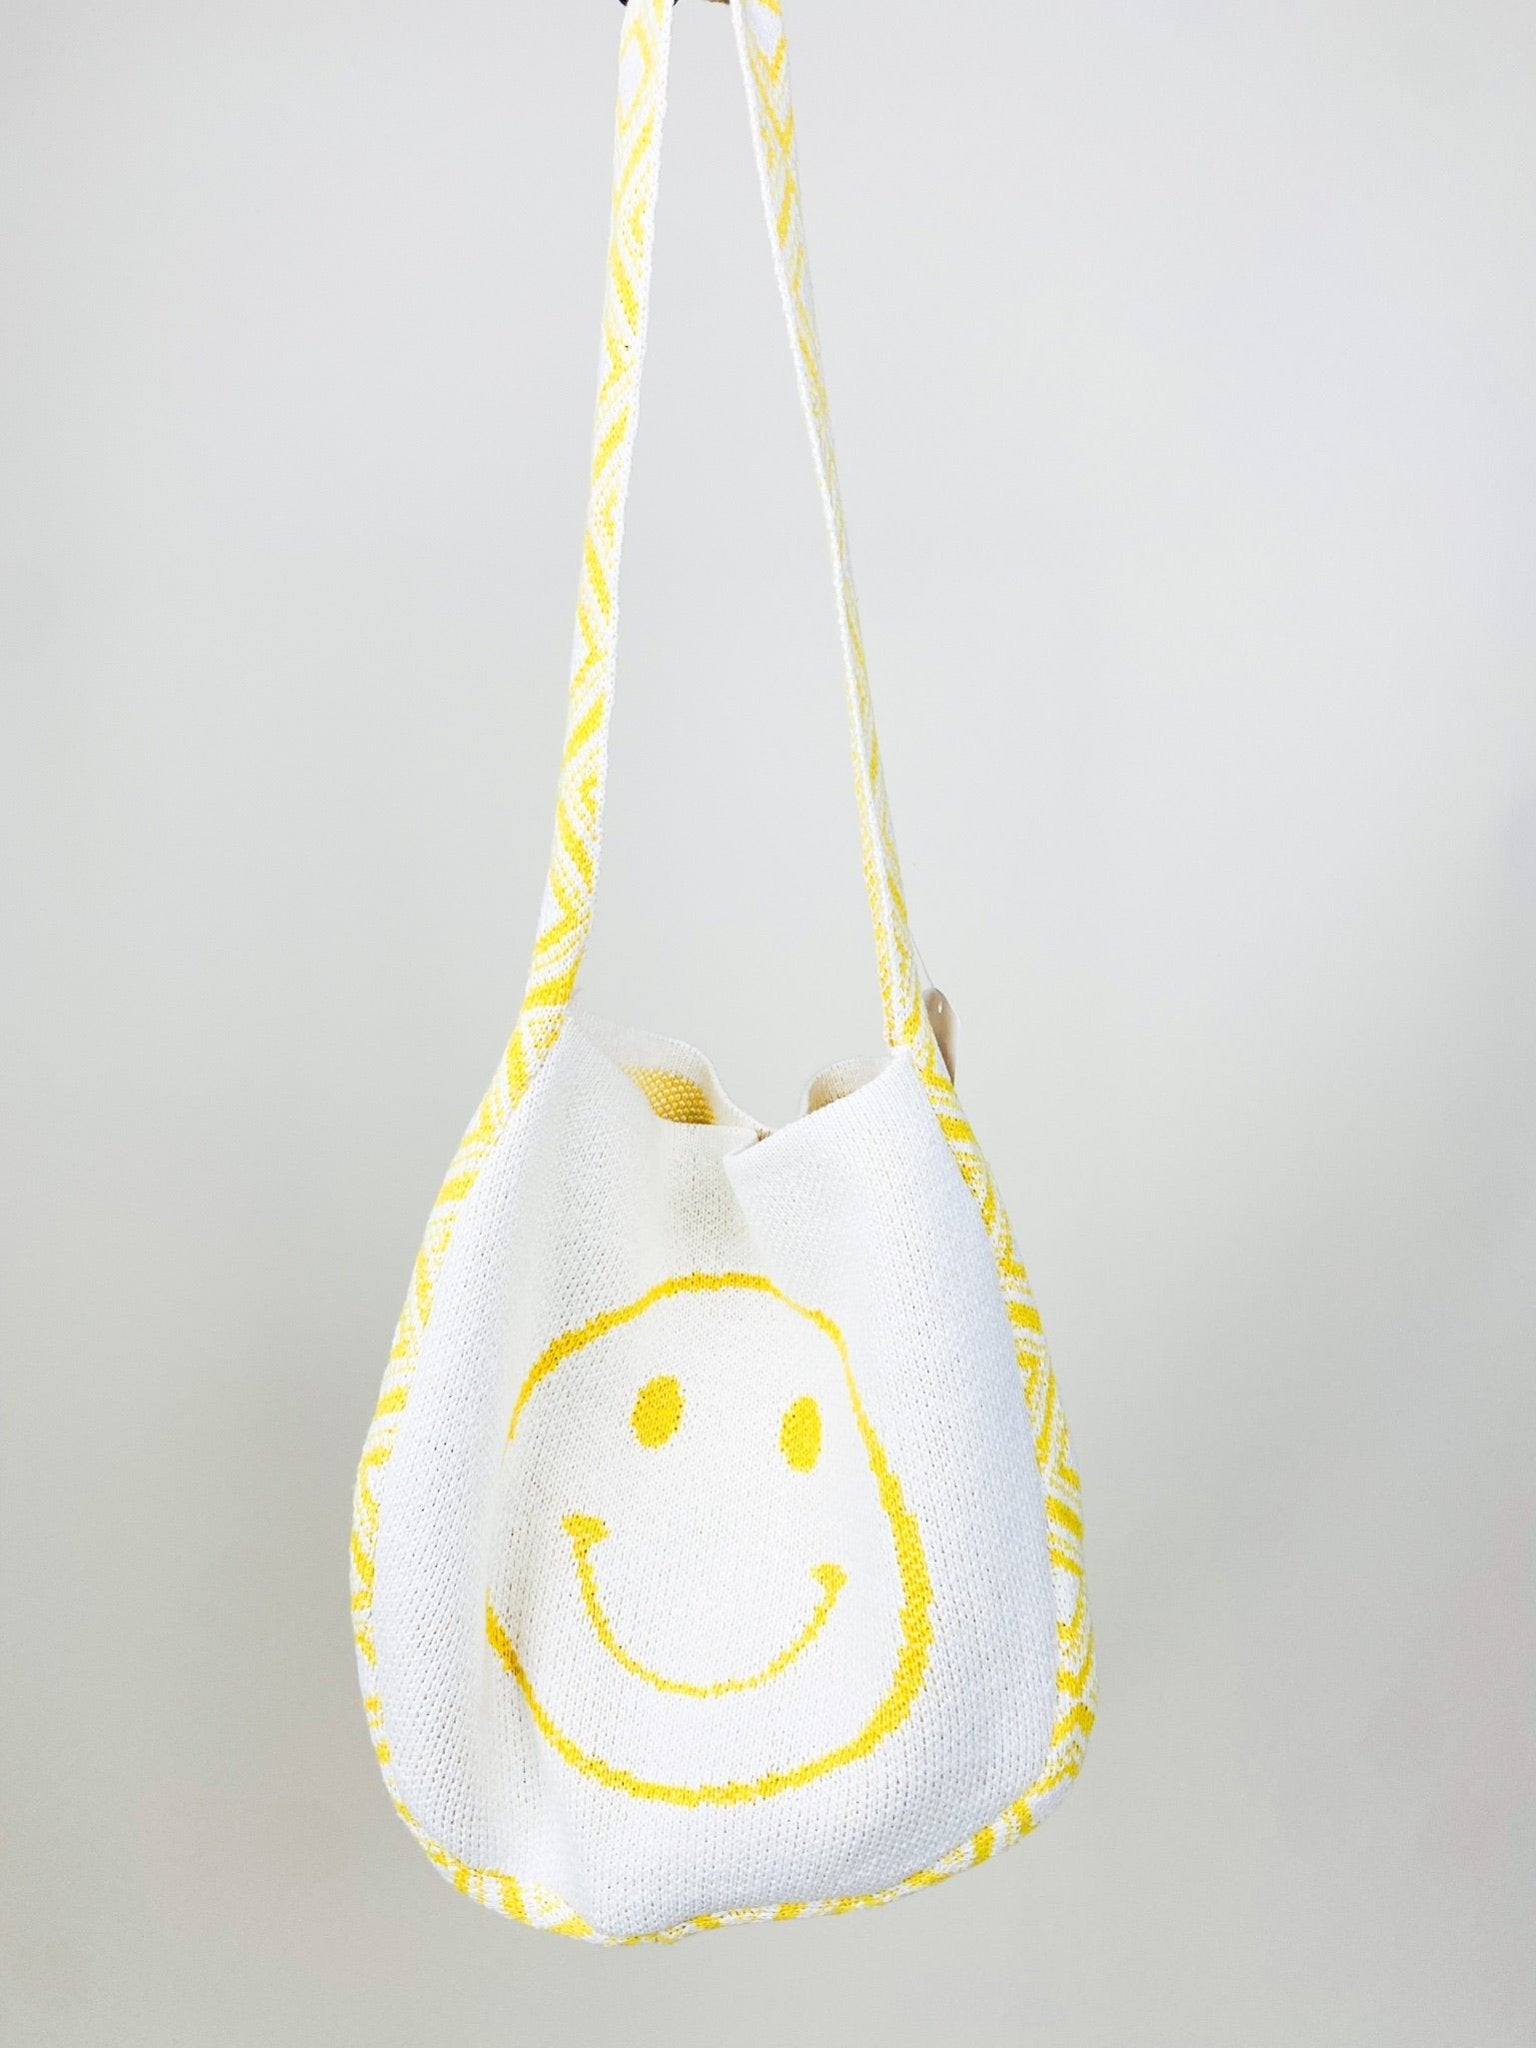 Smiley face geo woven bag yellow - Stylish bag - Trendy Summer Lake T-Shirts and Tank Tops at Lush Fashion Lounge Boutique in Oklahoma City